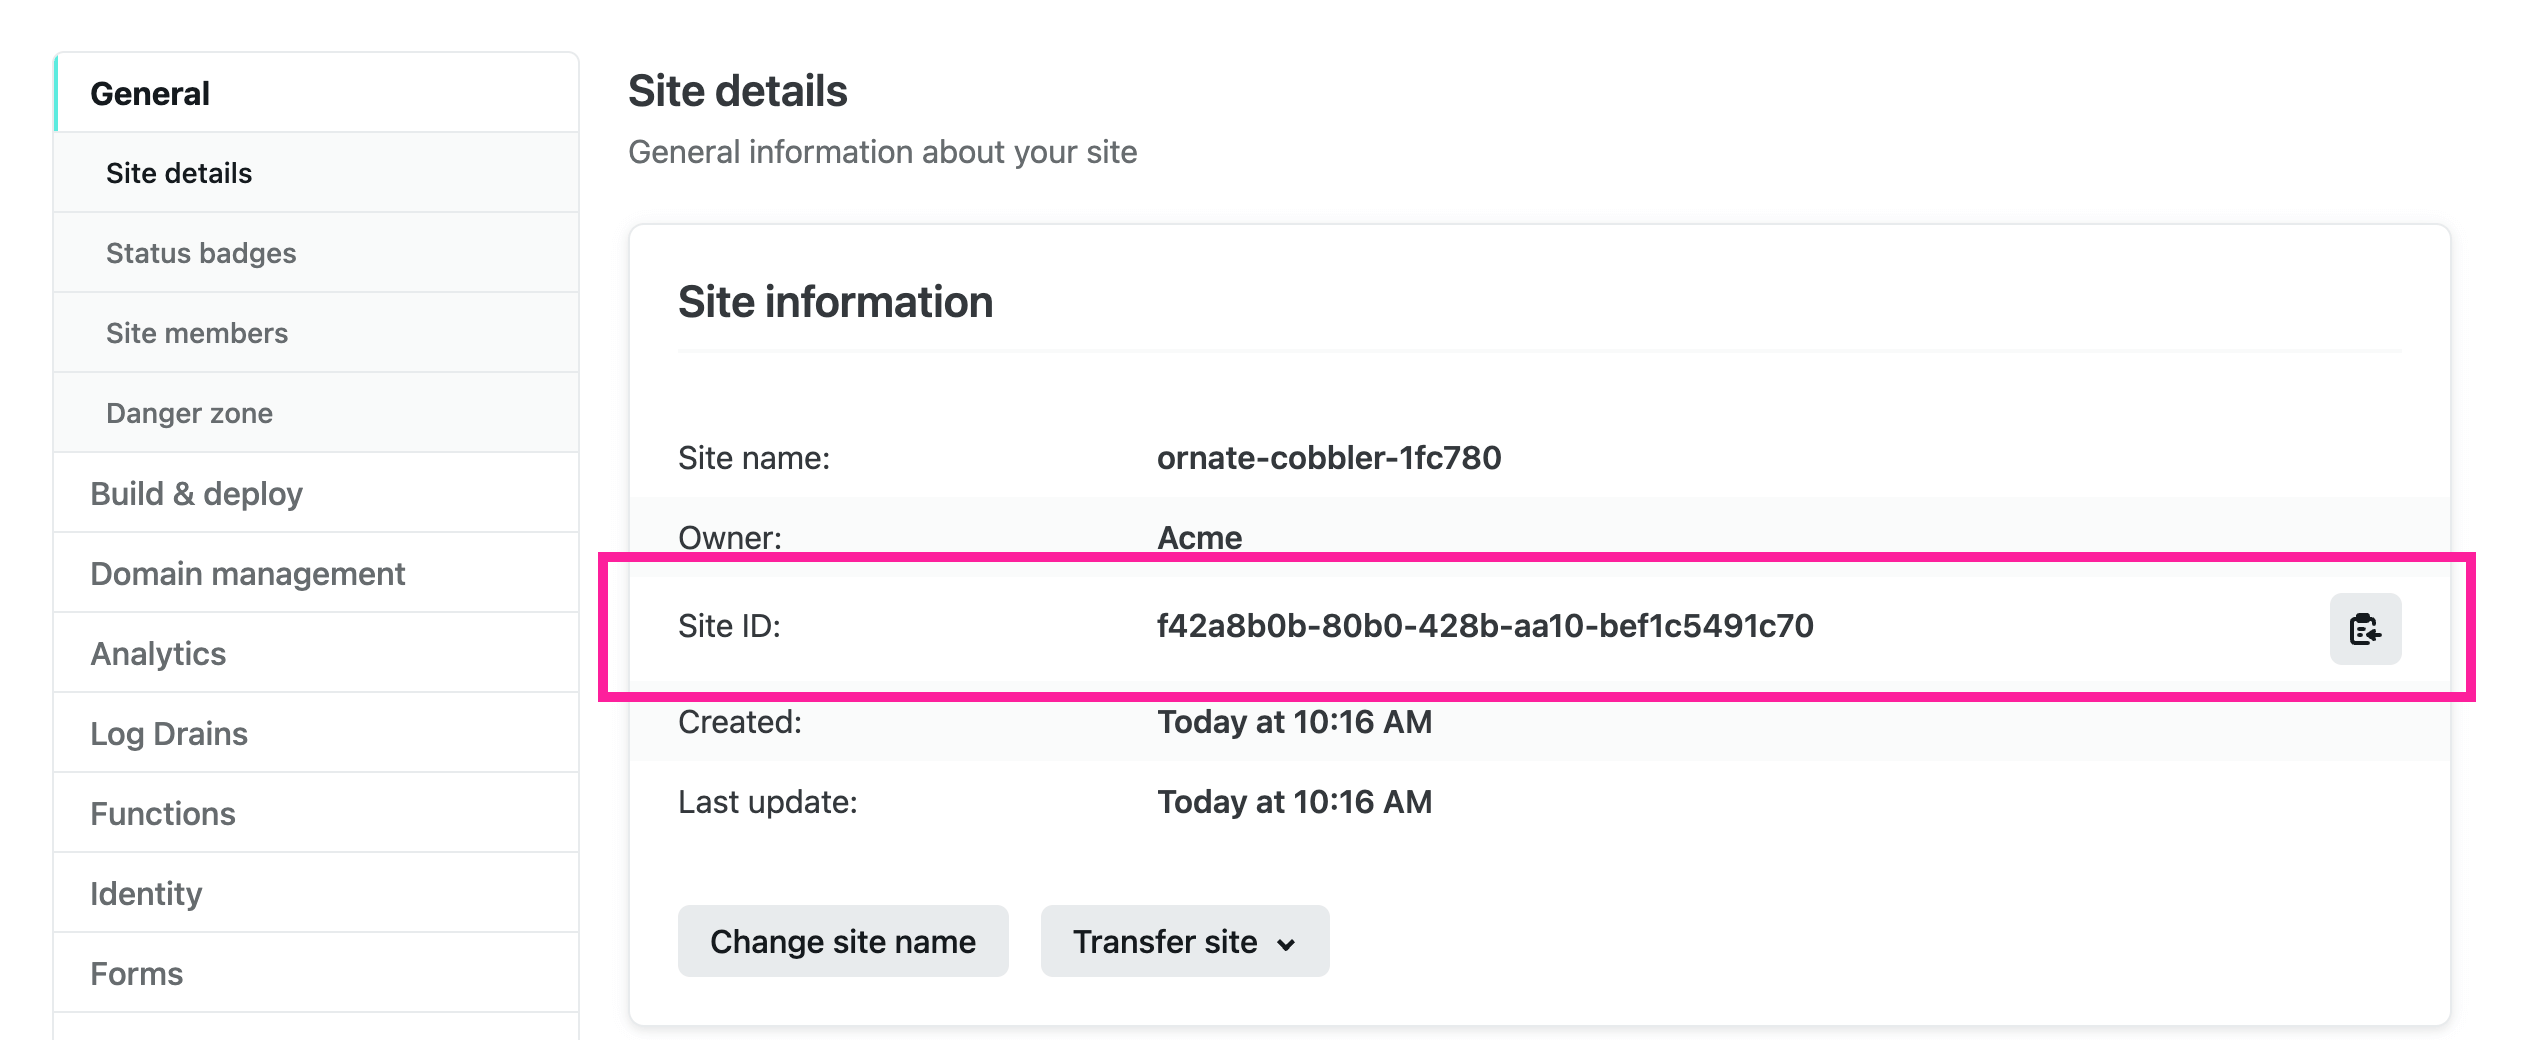 Site details in Netlify. There is a Site ID entry that you need to copy so that it can be pasted into Paligo's Netlify integration settings.